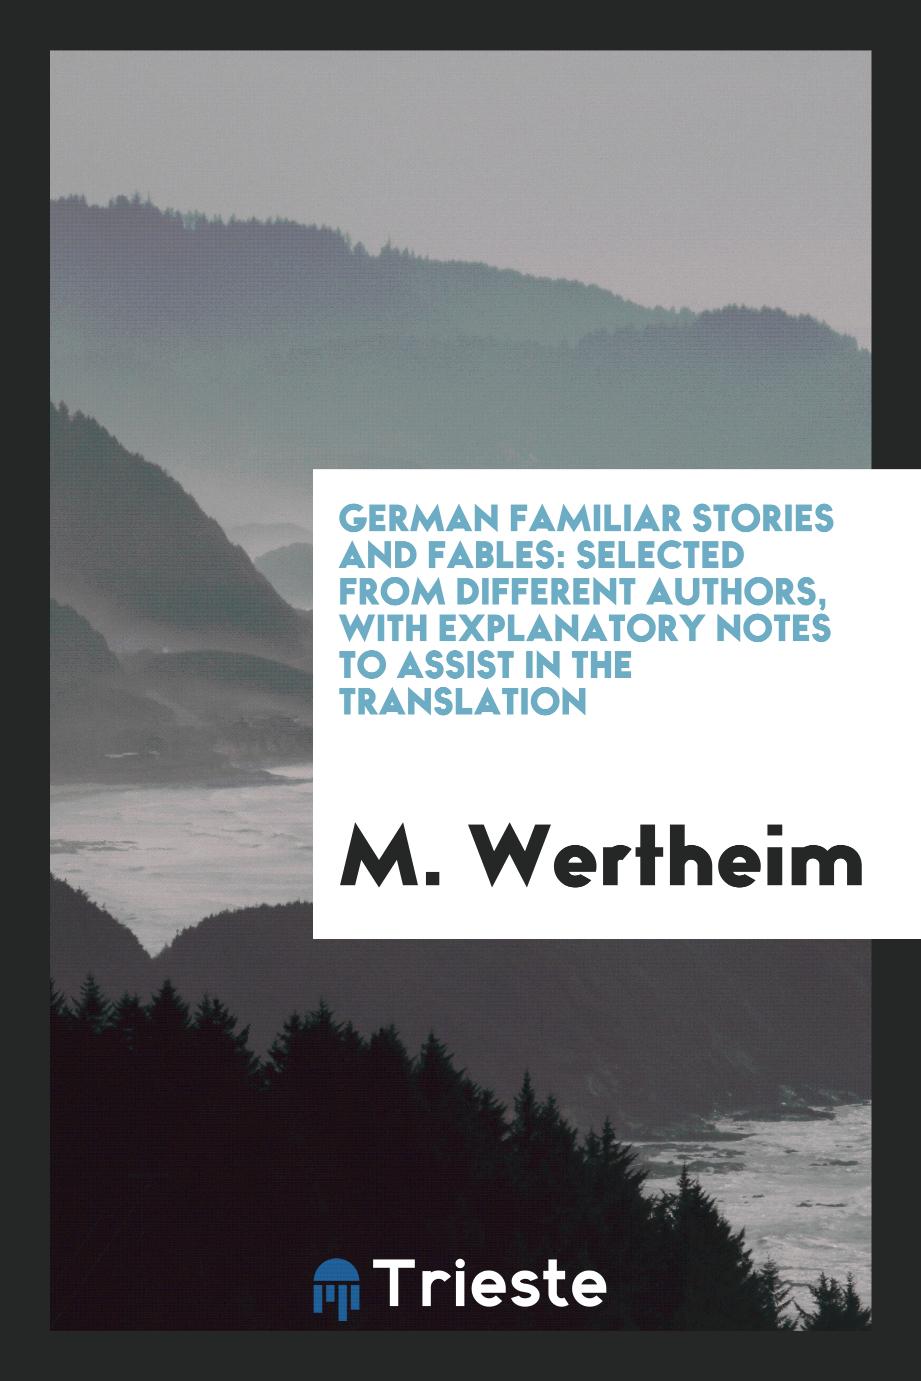 German familiar stories and fables: selected from different authors, with explanatory notes to assist in the translation